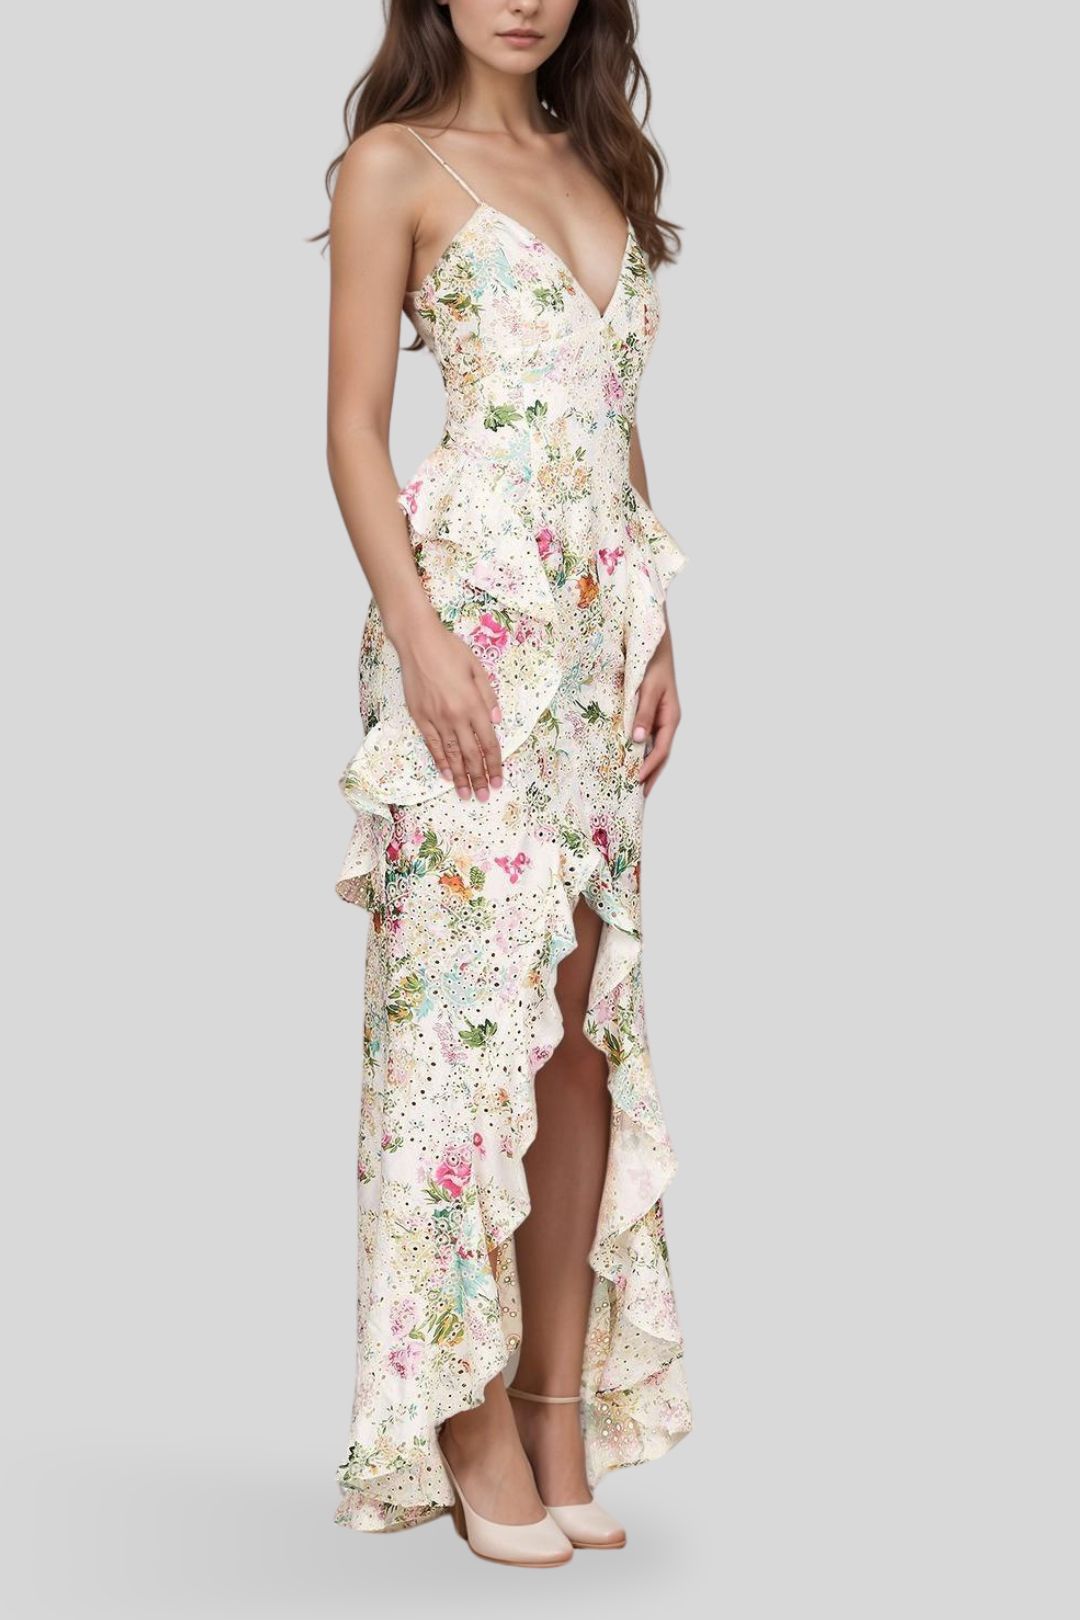 Nookie Darling Gown in Floral High Low